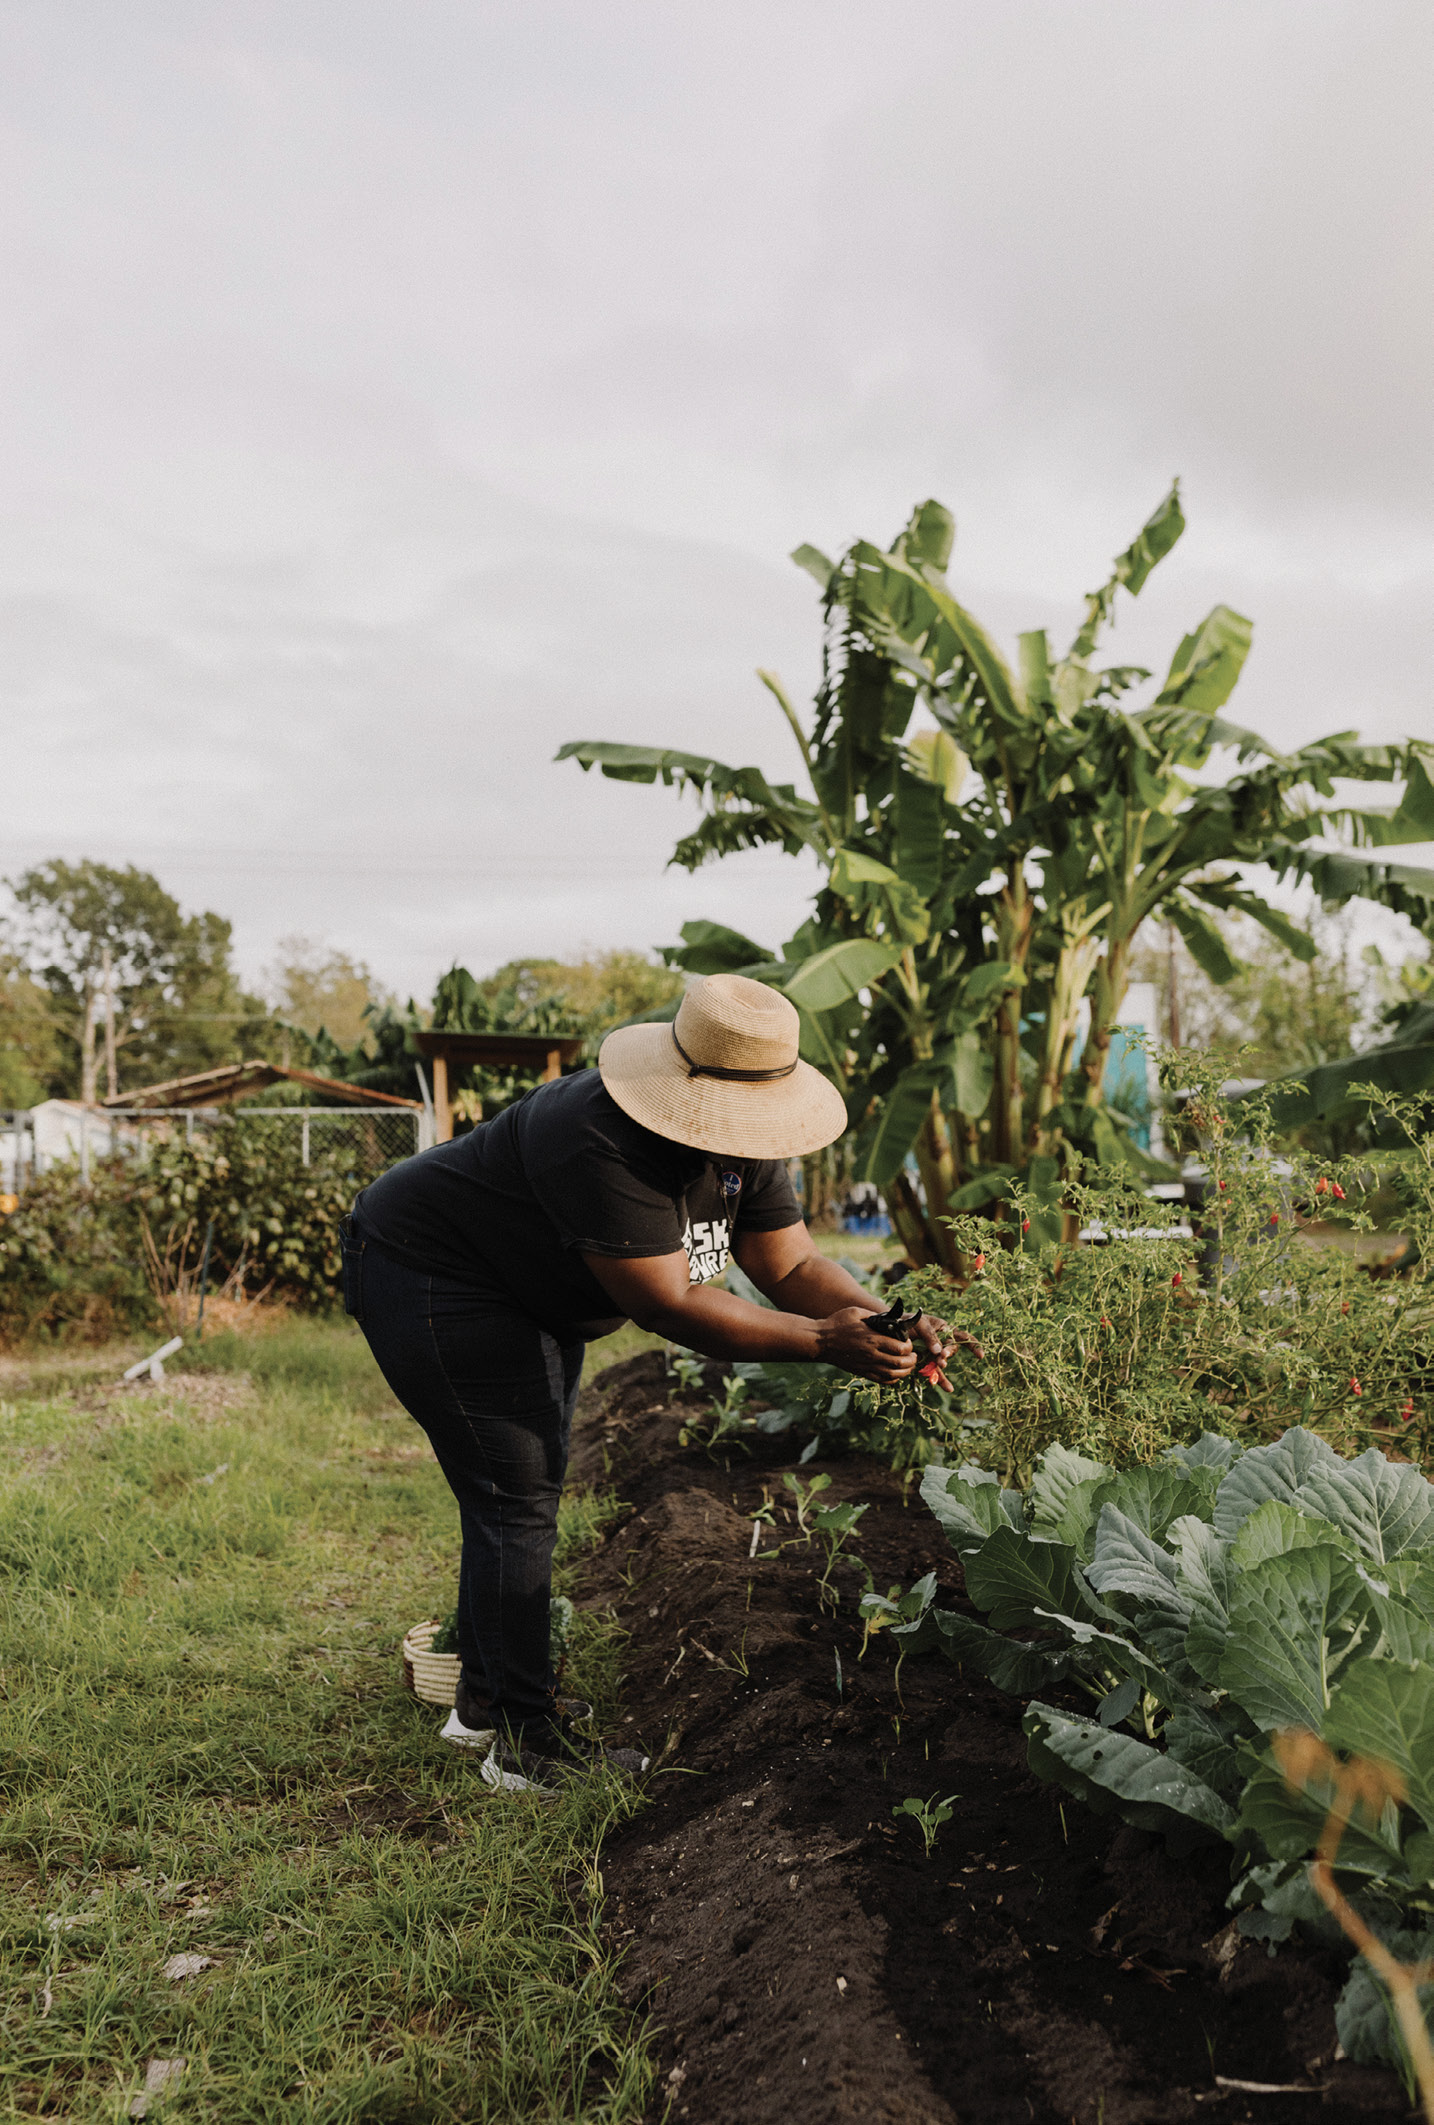 Green Thumb: Jenkins enjoys the hands-on, and nonstop, work of urban farming, from composting to planting to weeding and harvesting, but mostly she enjoys sharing her passion for a regenerative movement—one that breaks the cycle of poverty through growing health, jobs, and wealth.